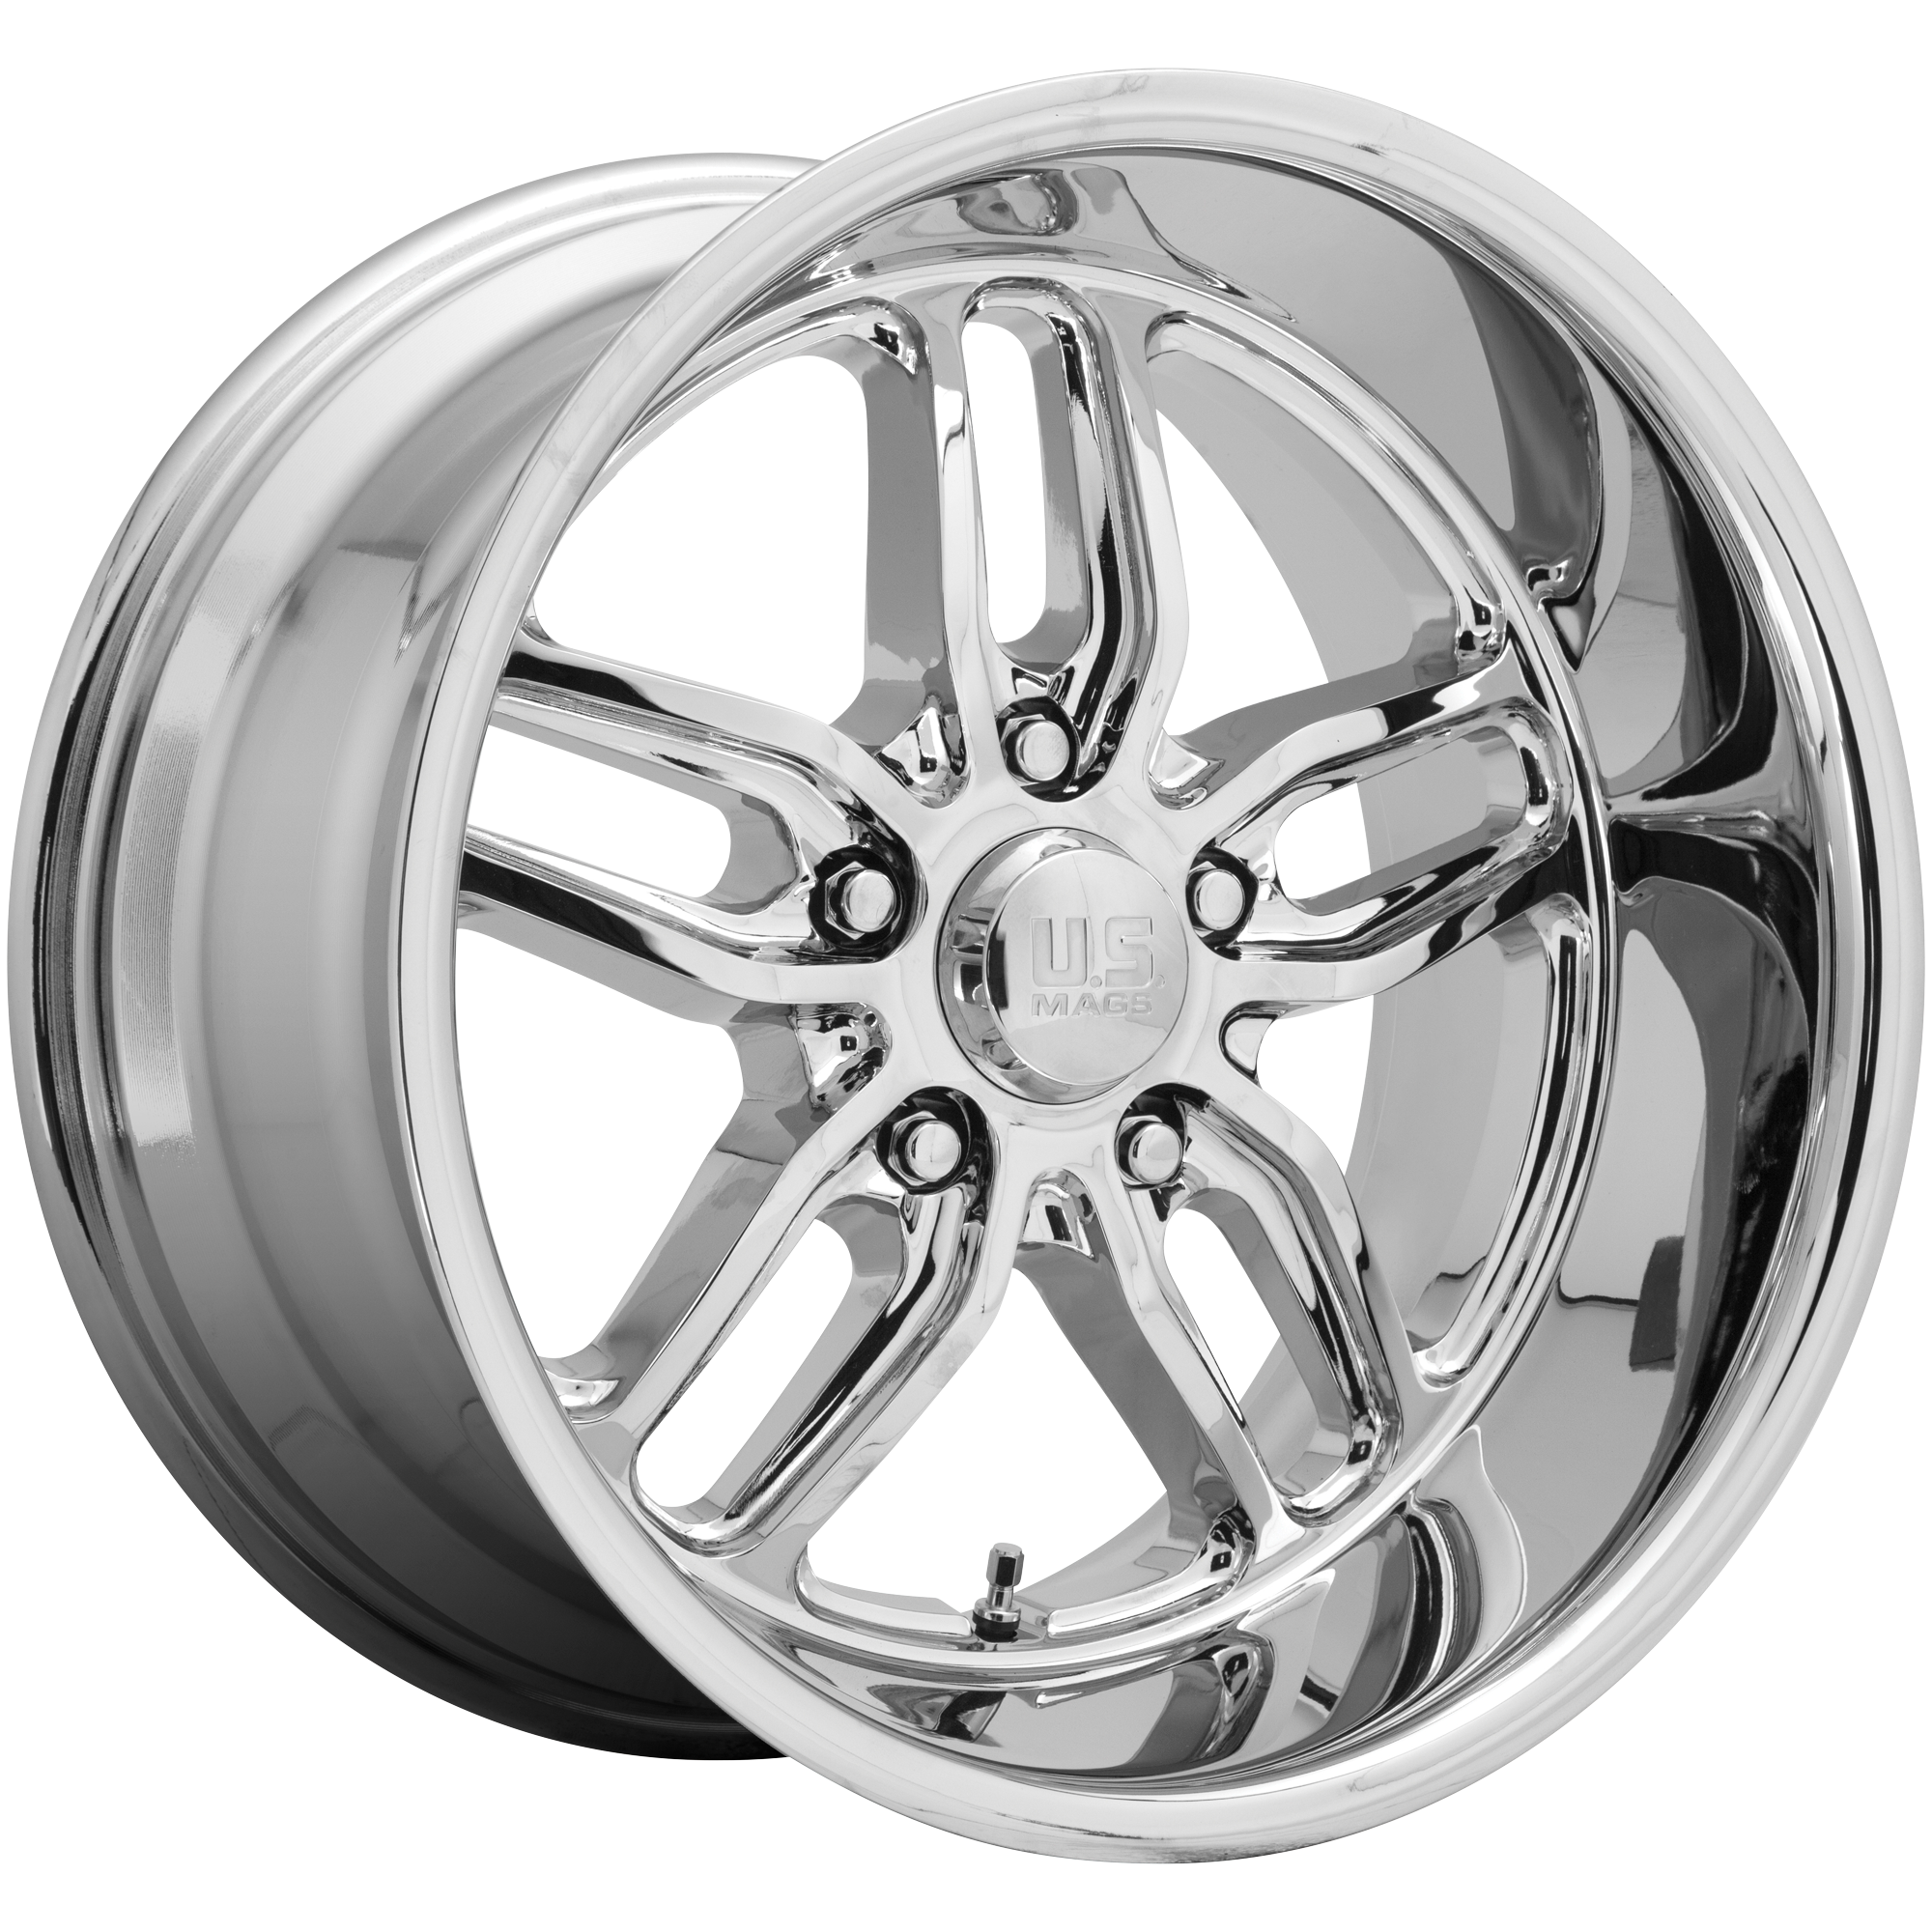 CTEN 18x9.5 5x127.00 CHROME PLATED (1 mm) - Tires and Engine Performance